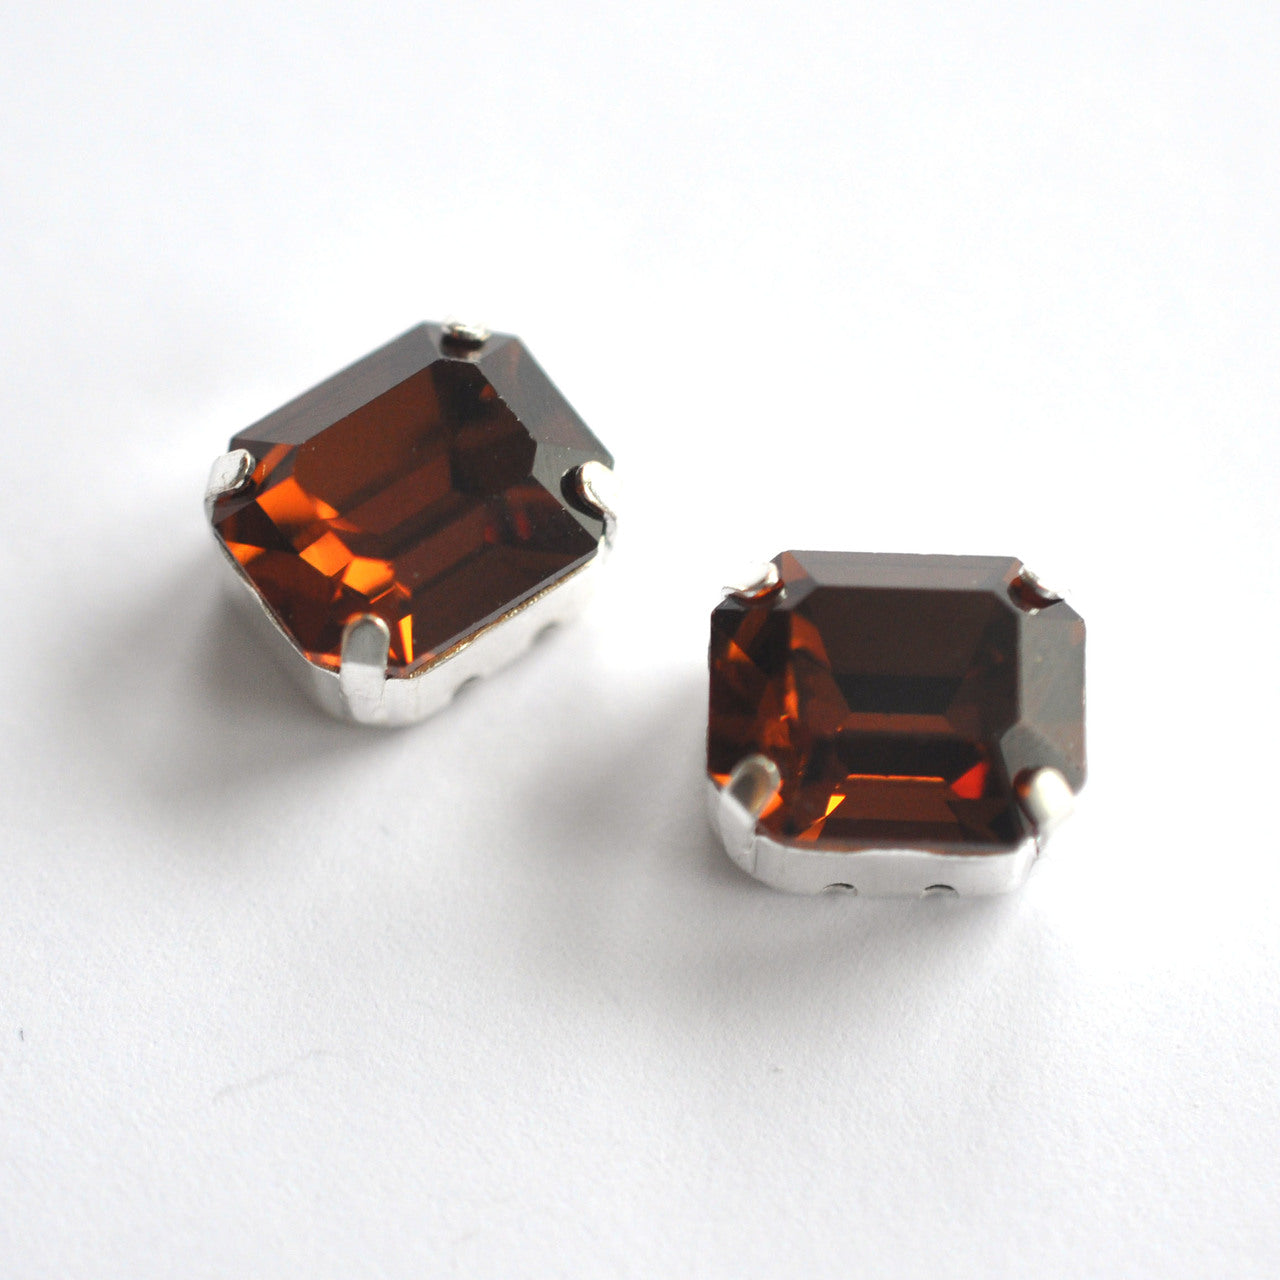 Smoked Topaz 12x10mm Octagon Sew On Crystals - 2 Pieces